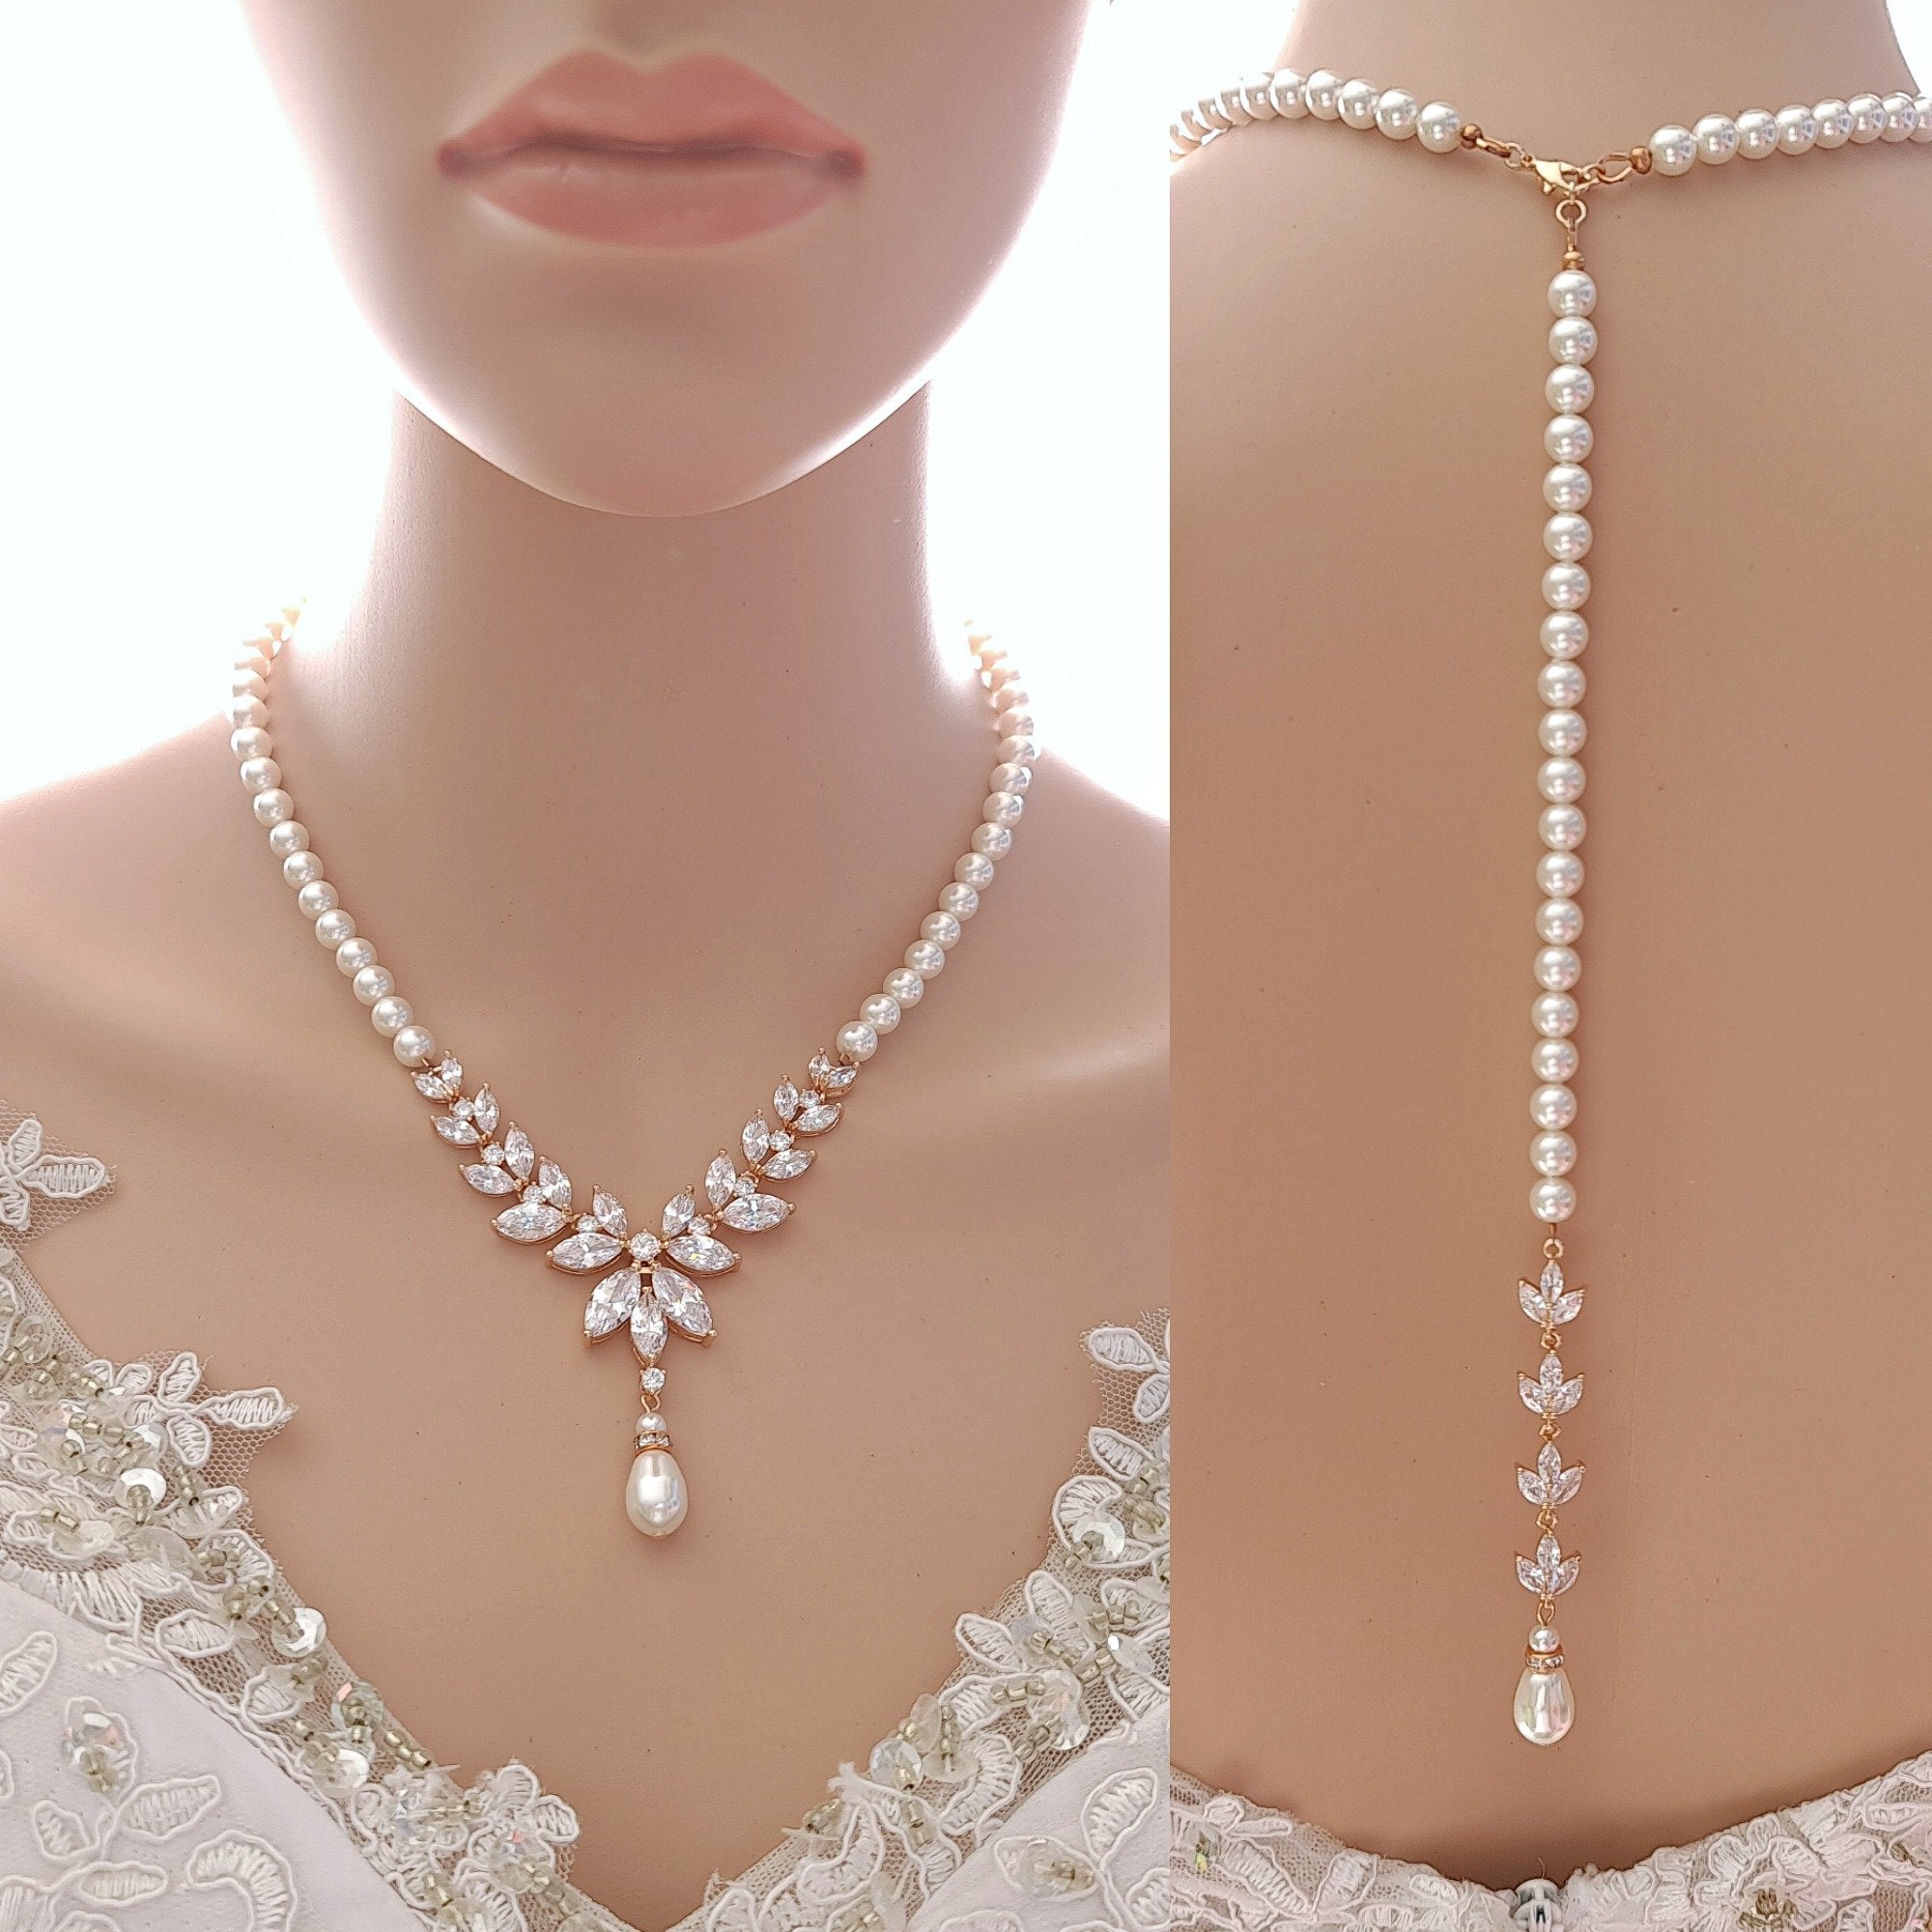 Back Drop Necklace SET, Rose Gold Pearl Back Necklace, Bridal Earrings,  Wedding Jewelry SET, Swarovski Pearl Earrings and Necklace, TAYLOR - Etsy |  Swarovski pearl earrings, Bridal necklace, Rose gold jewelry set